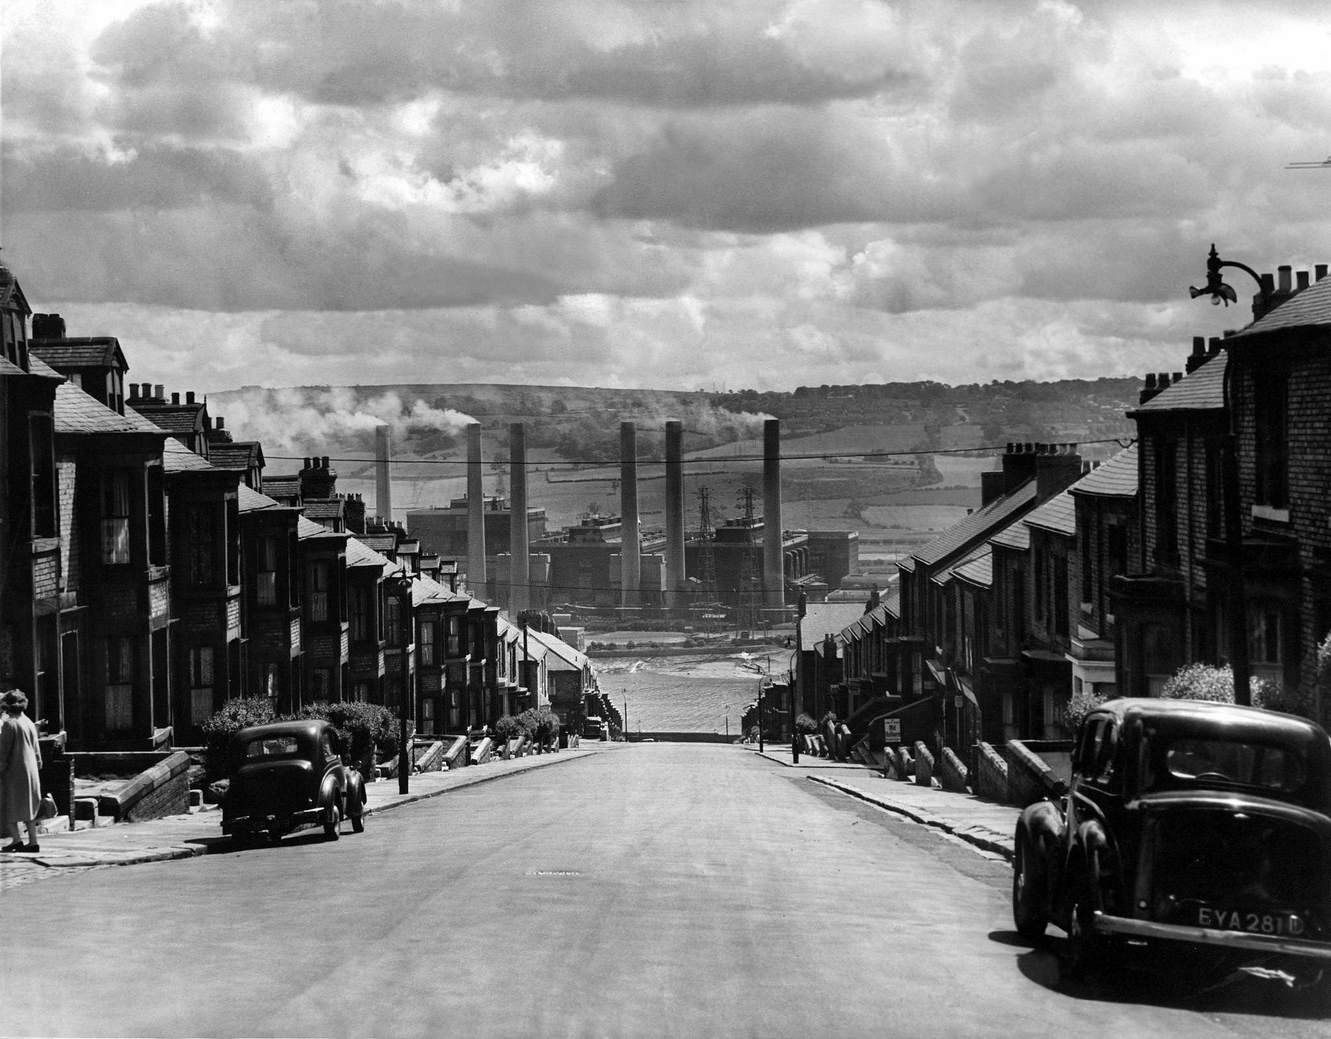 Dunston Power Station's six chimneys rise into the air with rolling fields behind them – on the spot where the MetroCentre now stands in Gateshead, 1960s